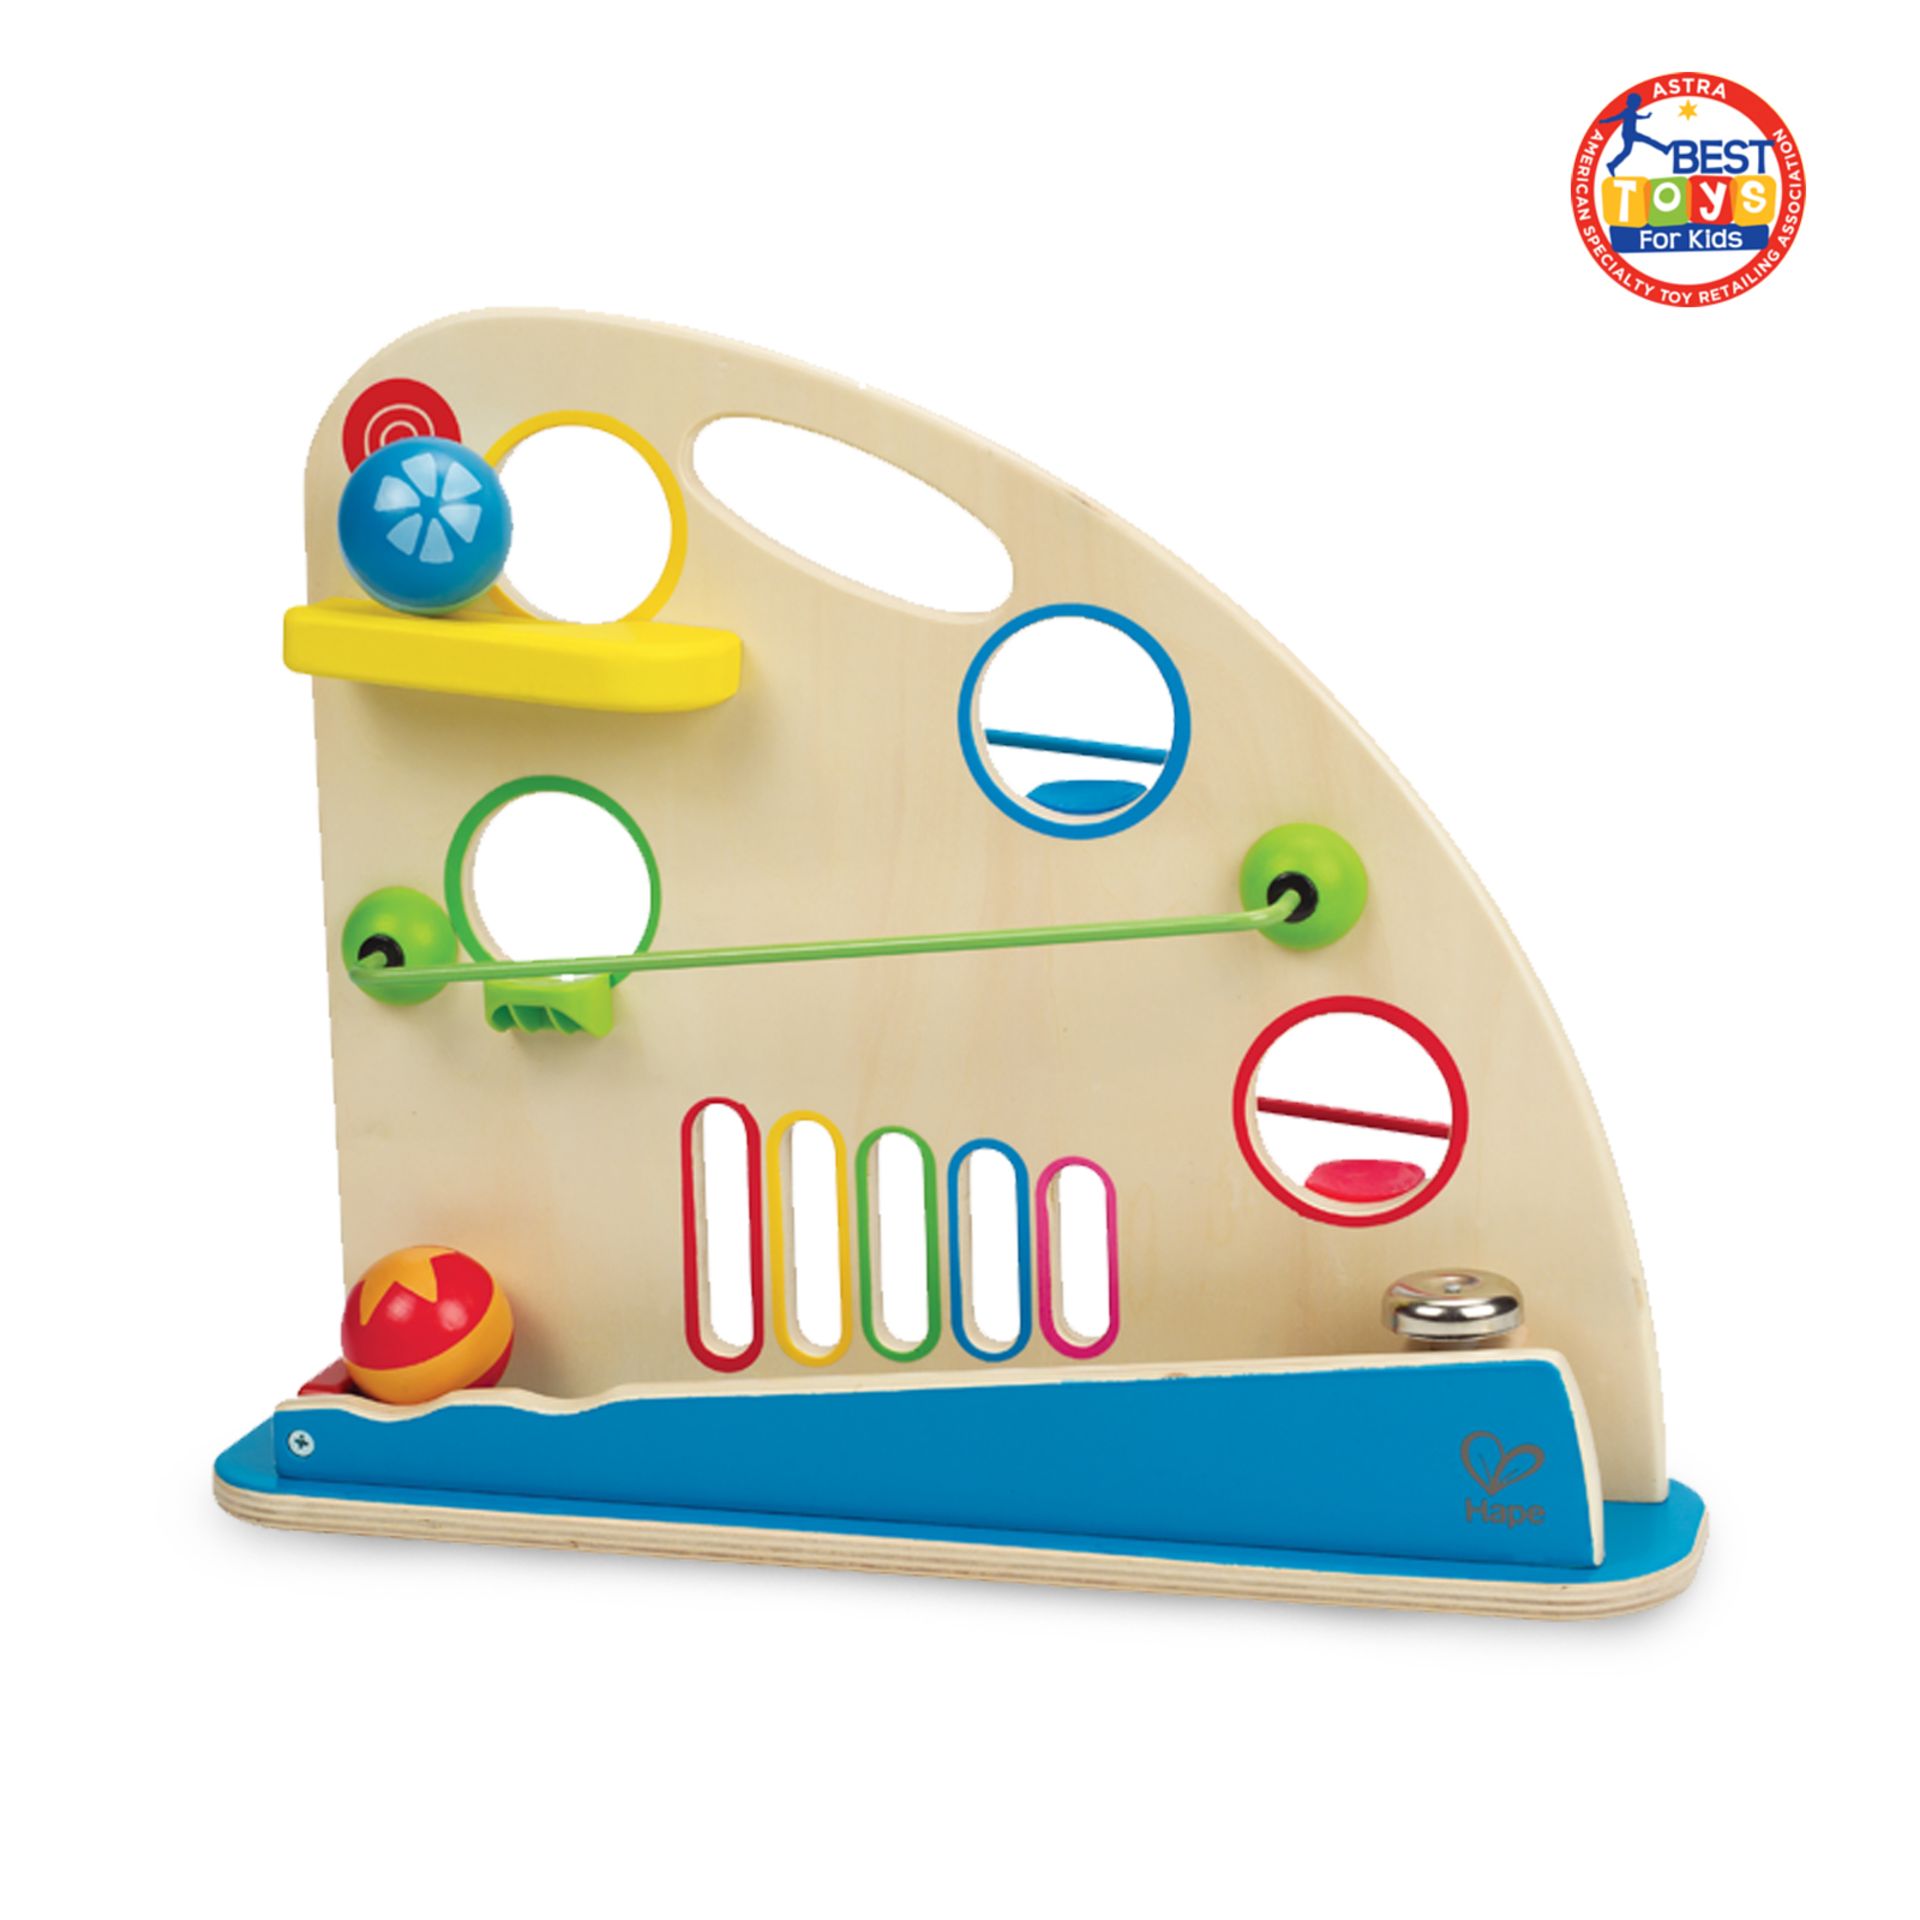 97 x Family Games & Toys products as listed | RRP £ 2002 - Image 7 of 7